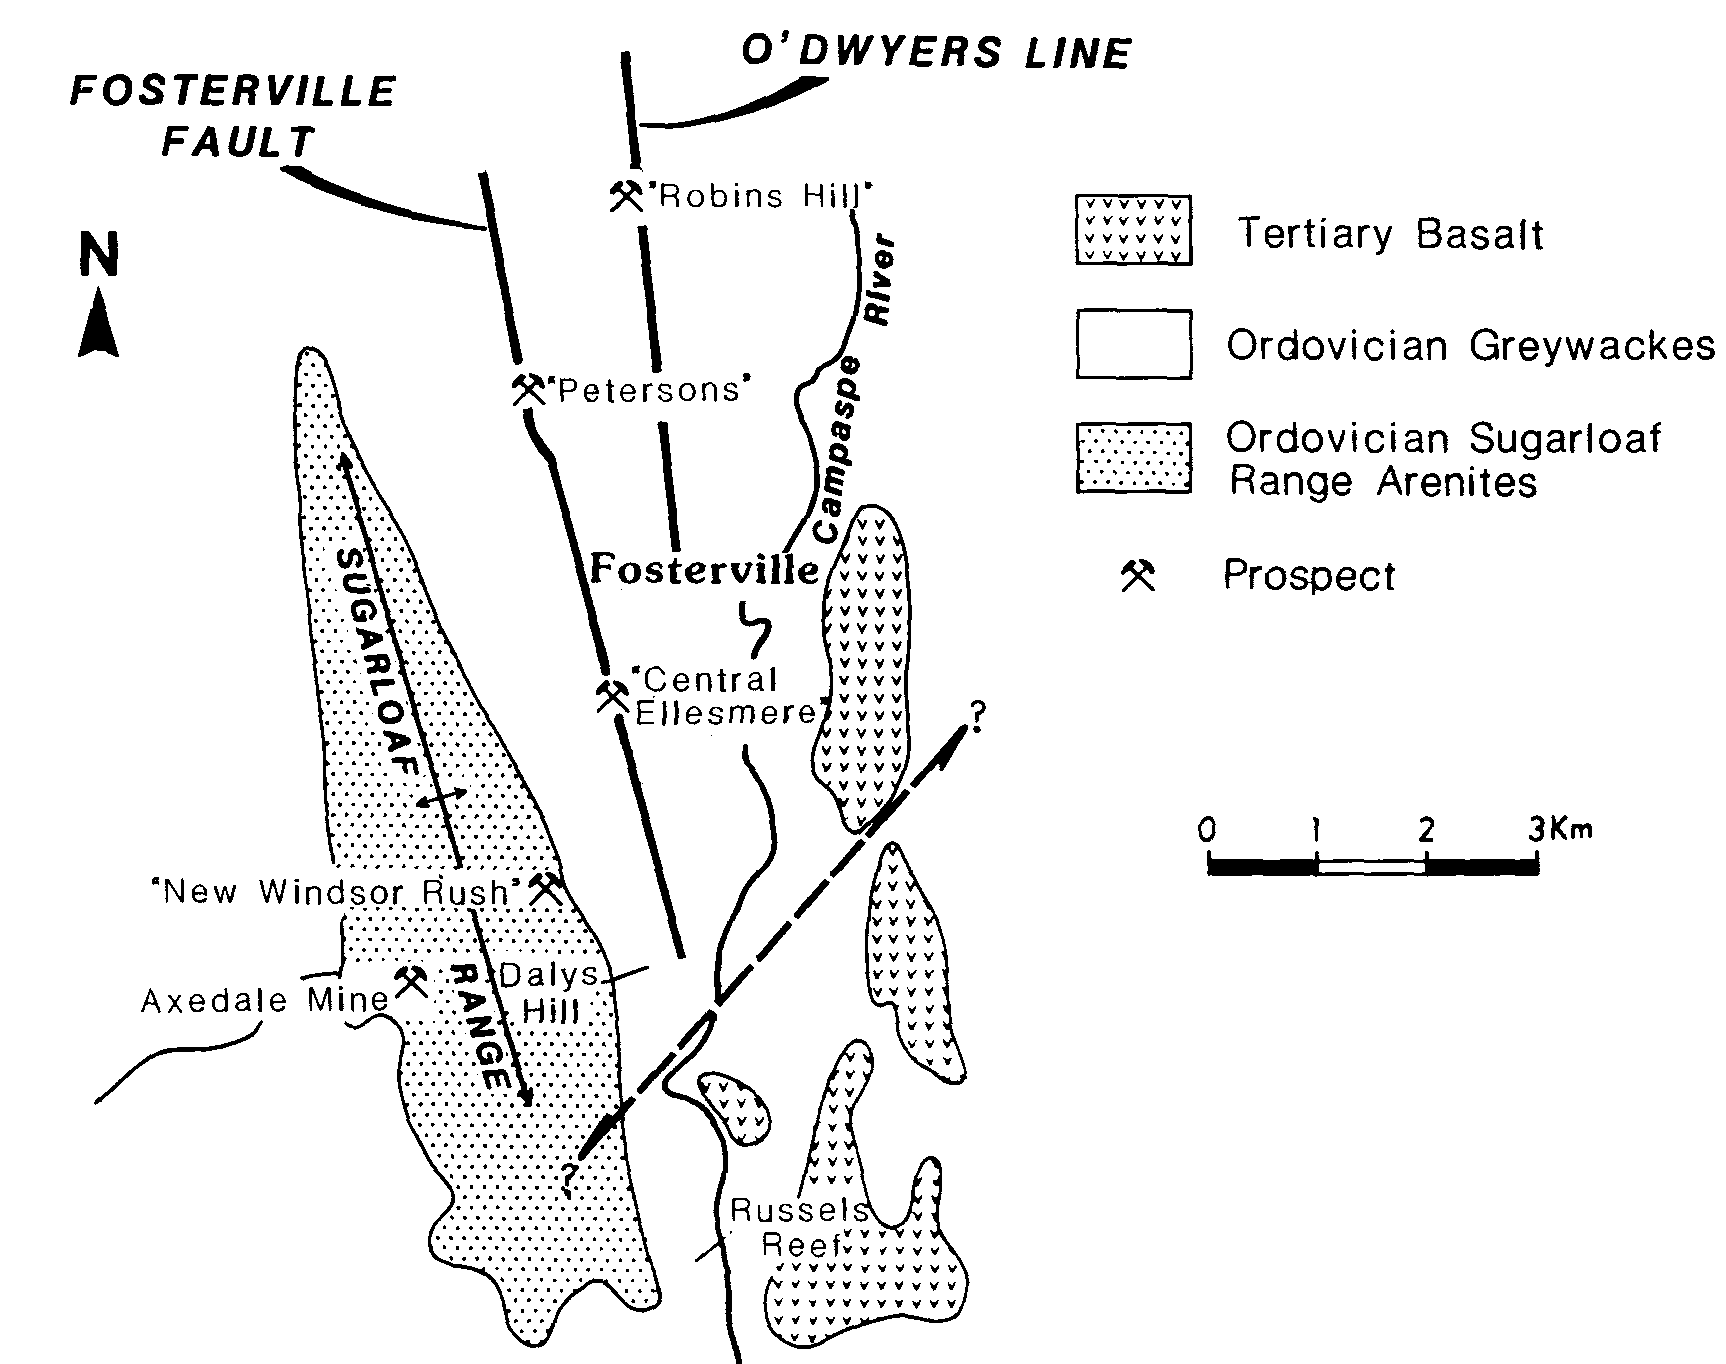 Fosterville region and geology